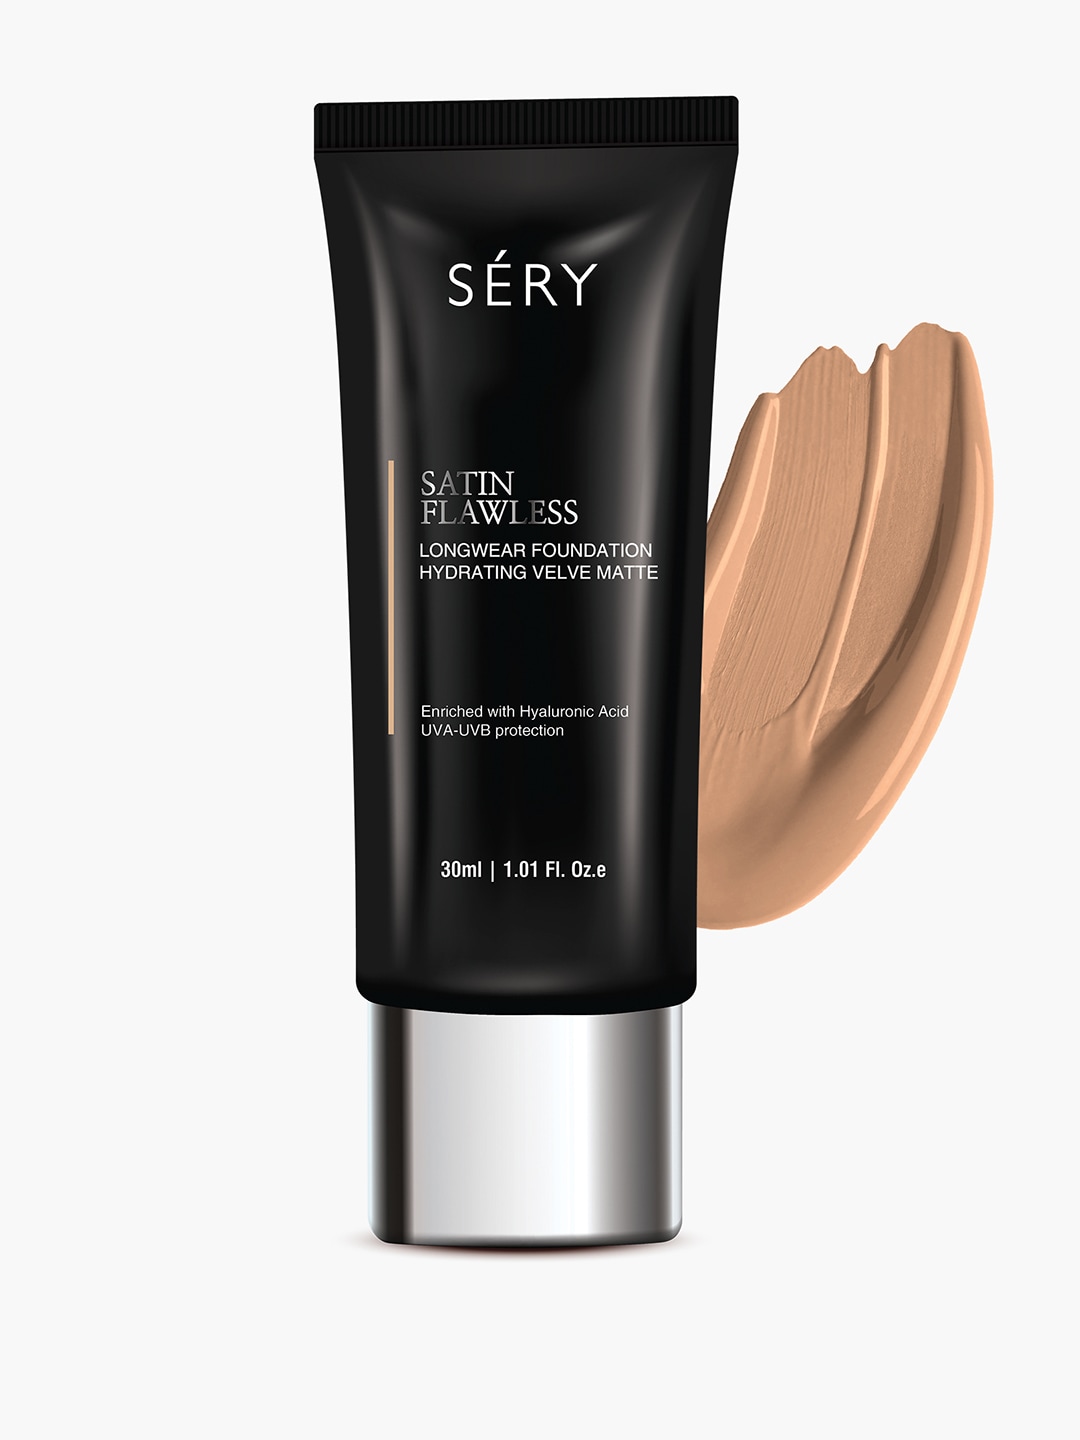 SERY Satin Flawless Longwear Foundation with UVA-UVB Filters 30ml - Light Medium Price in India